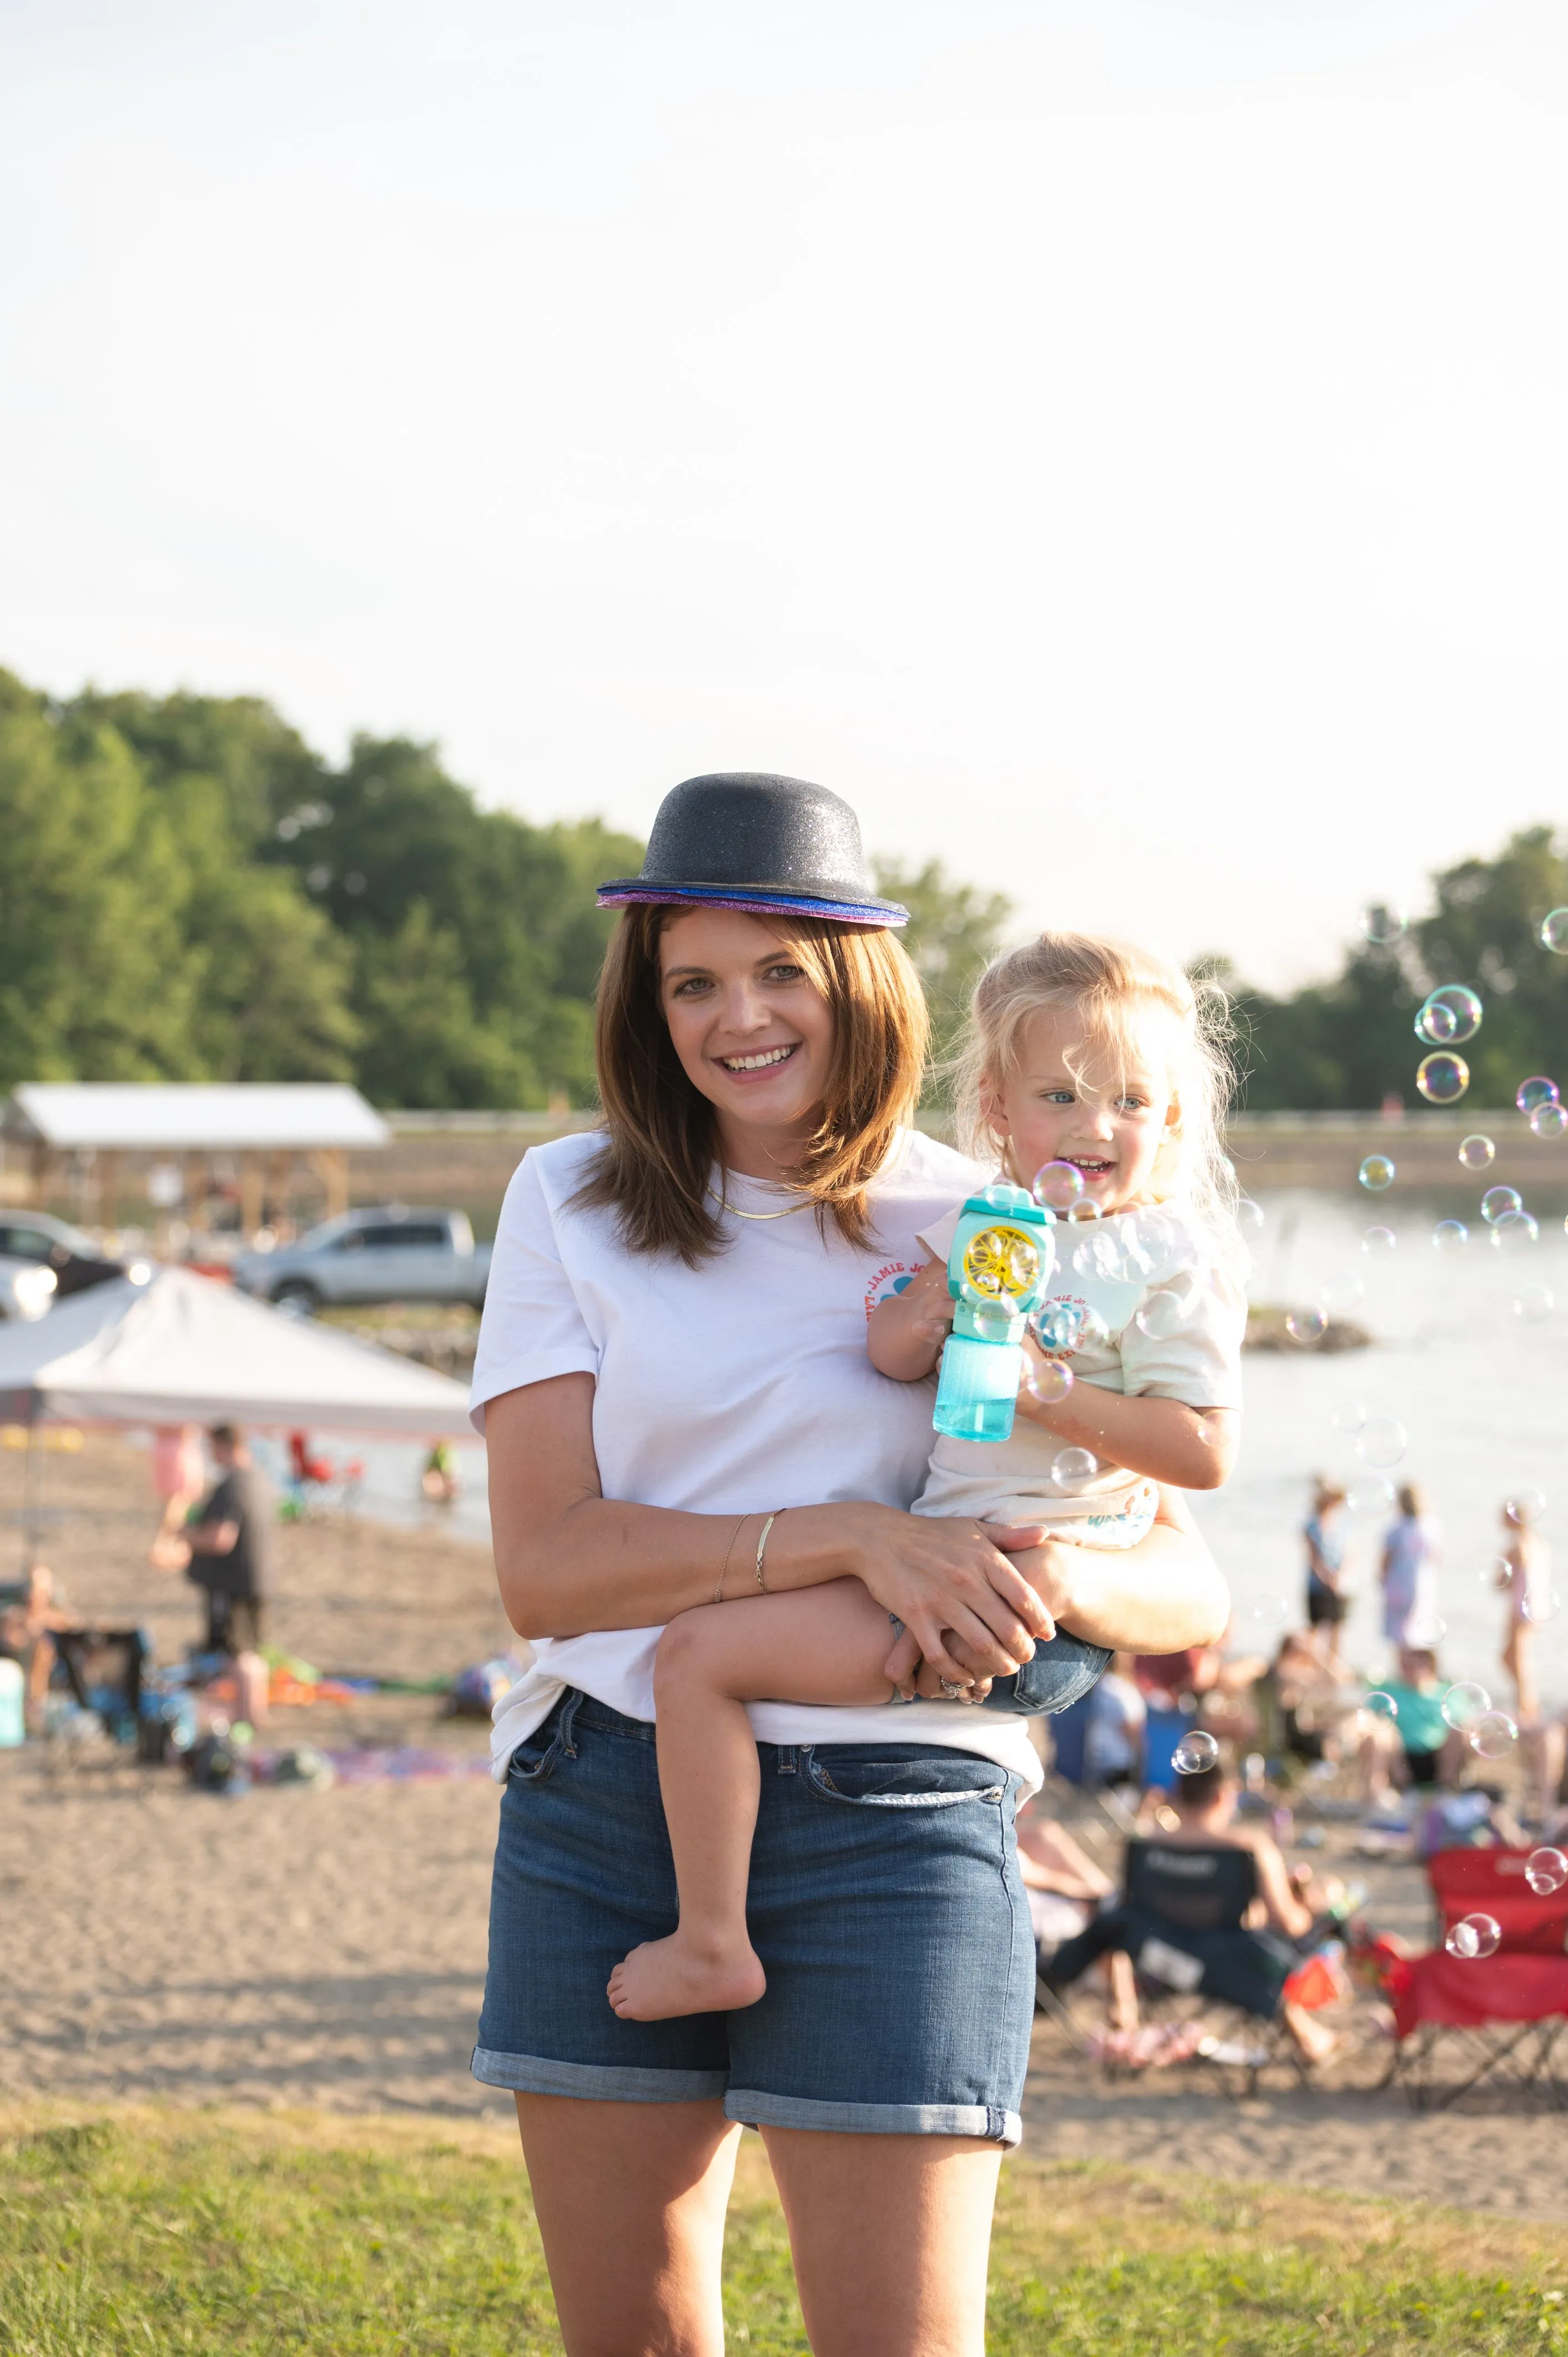 Woman holding a child at a beach with people in the background.